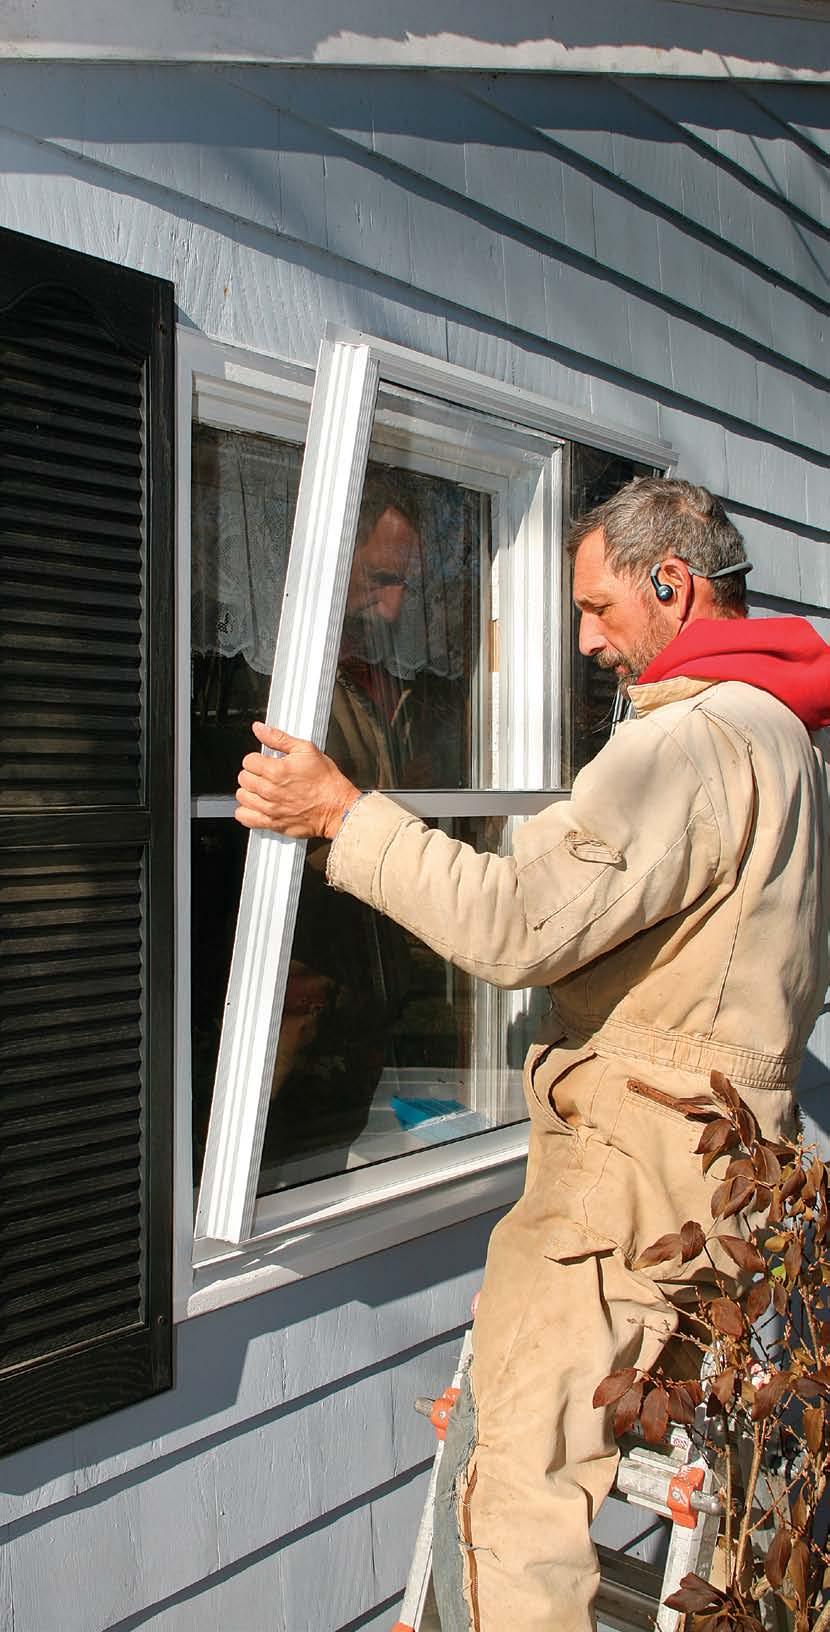 Save Energy With Storm Windows A client contacted me about installing replacement double-hung windows because she said the old ones were leaky and difficult